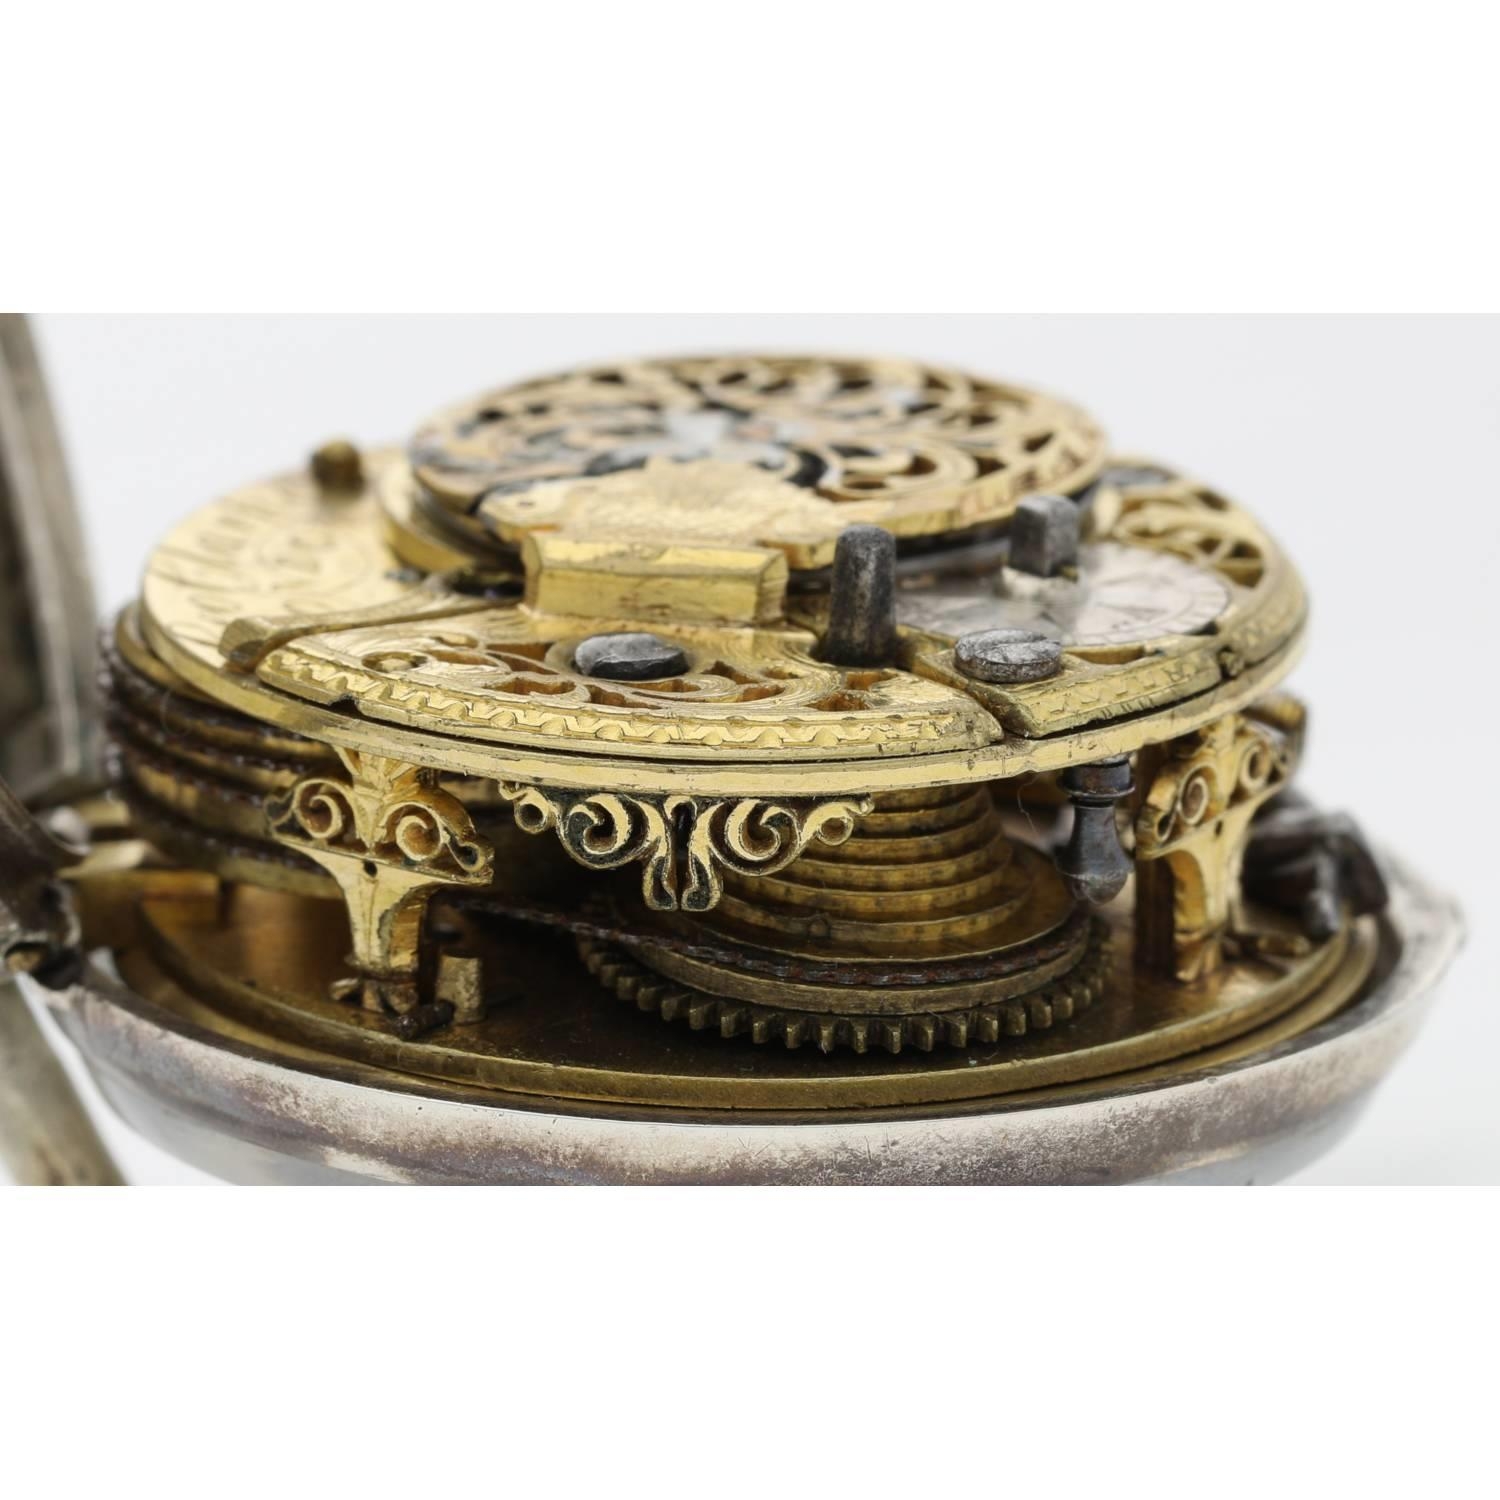 George Clarke, London - mid-18th century silver pair cased verge pocket watch made for the Turkish - Image 6 of 10